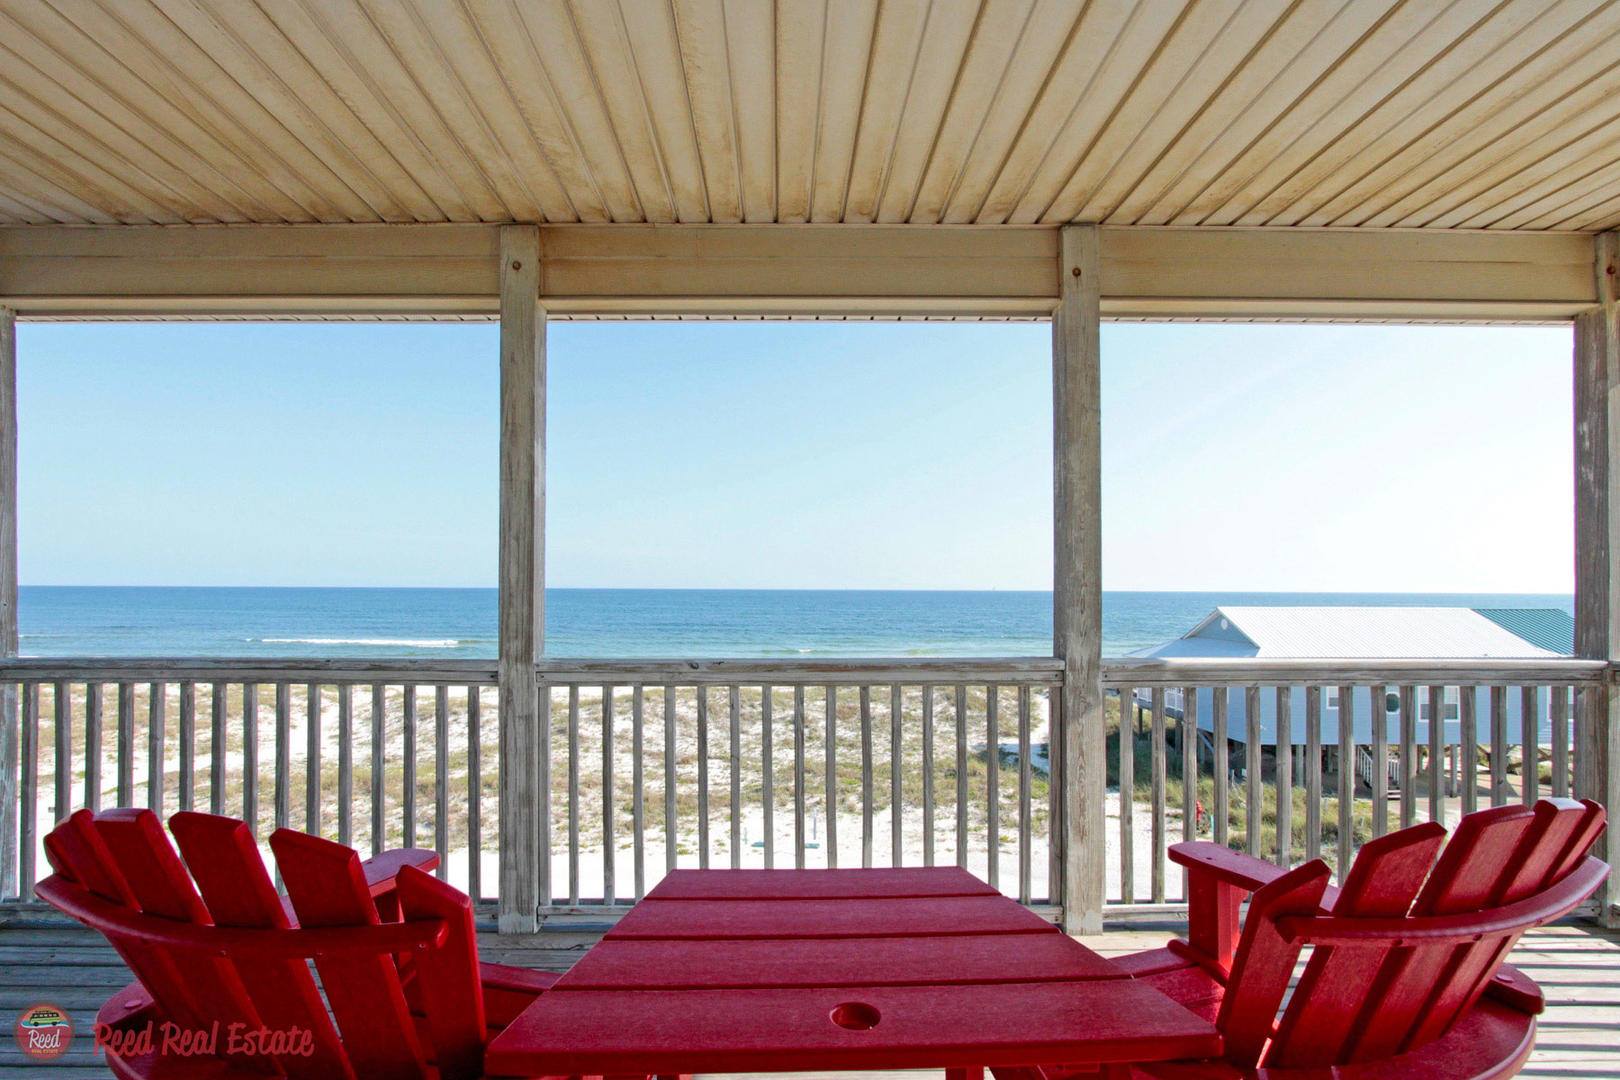 Reed Real Estate Gulf Shore Vacation Rental Deals and Special Offers